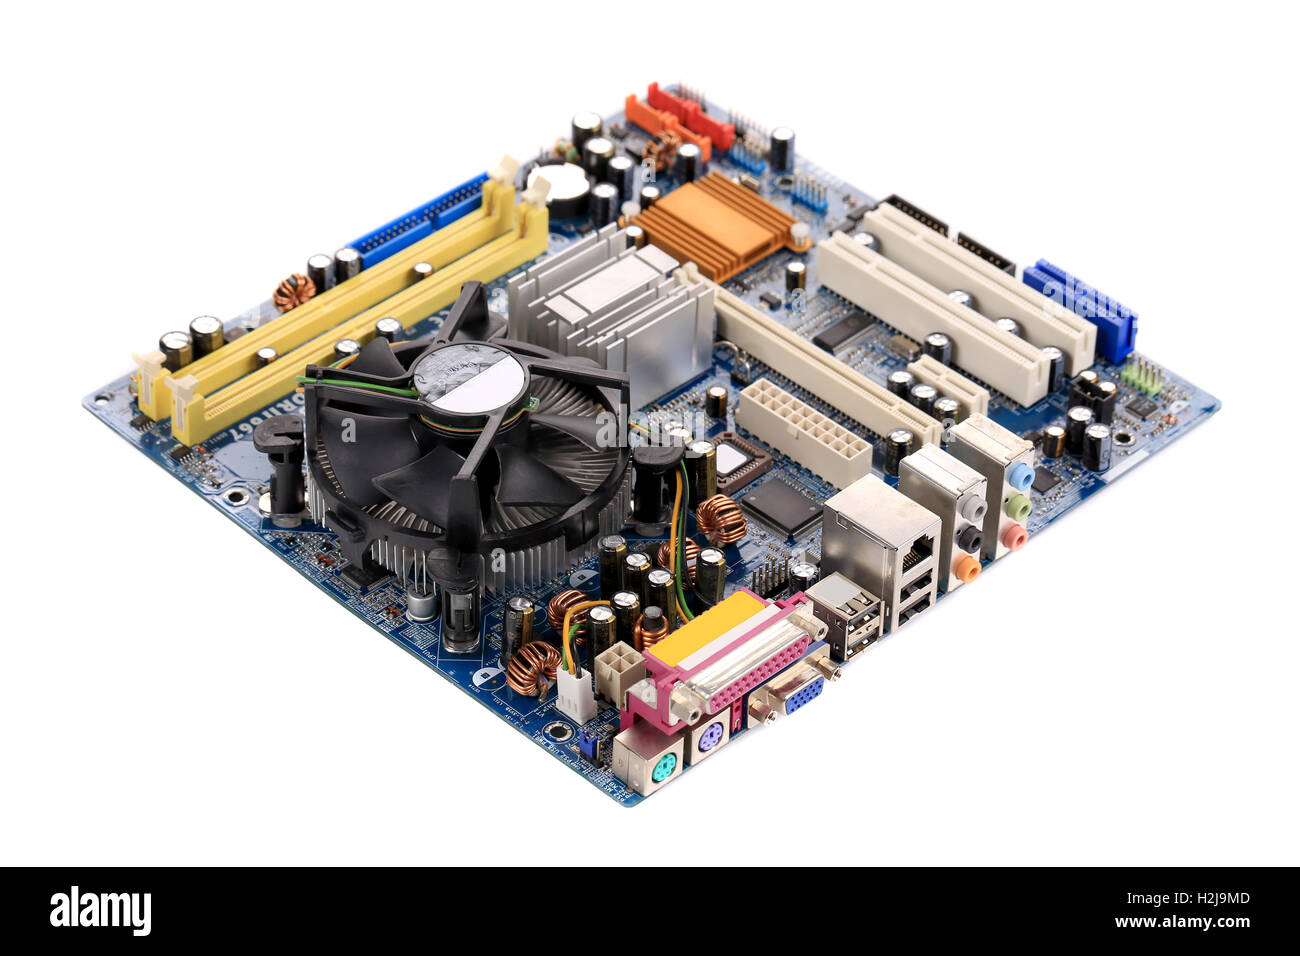 Motherboard High Resolution Stock Photography and Images - Alamy